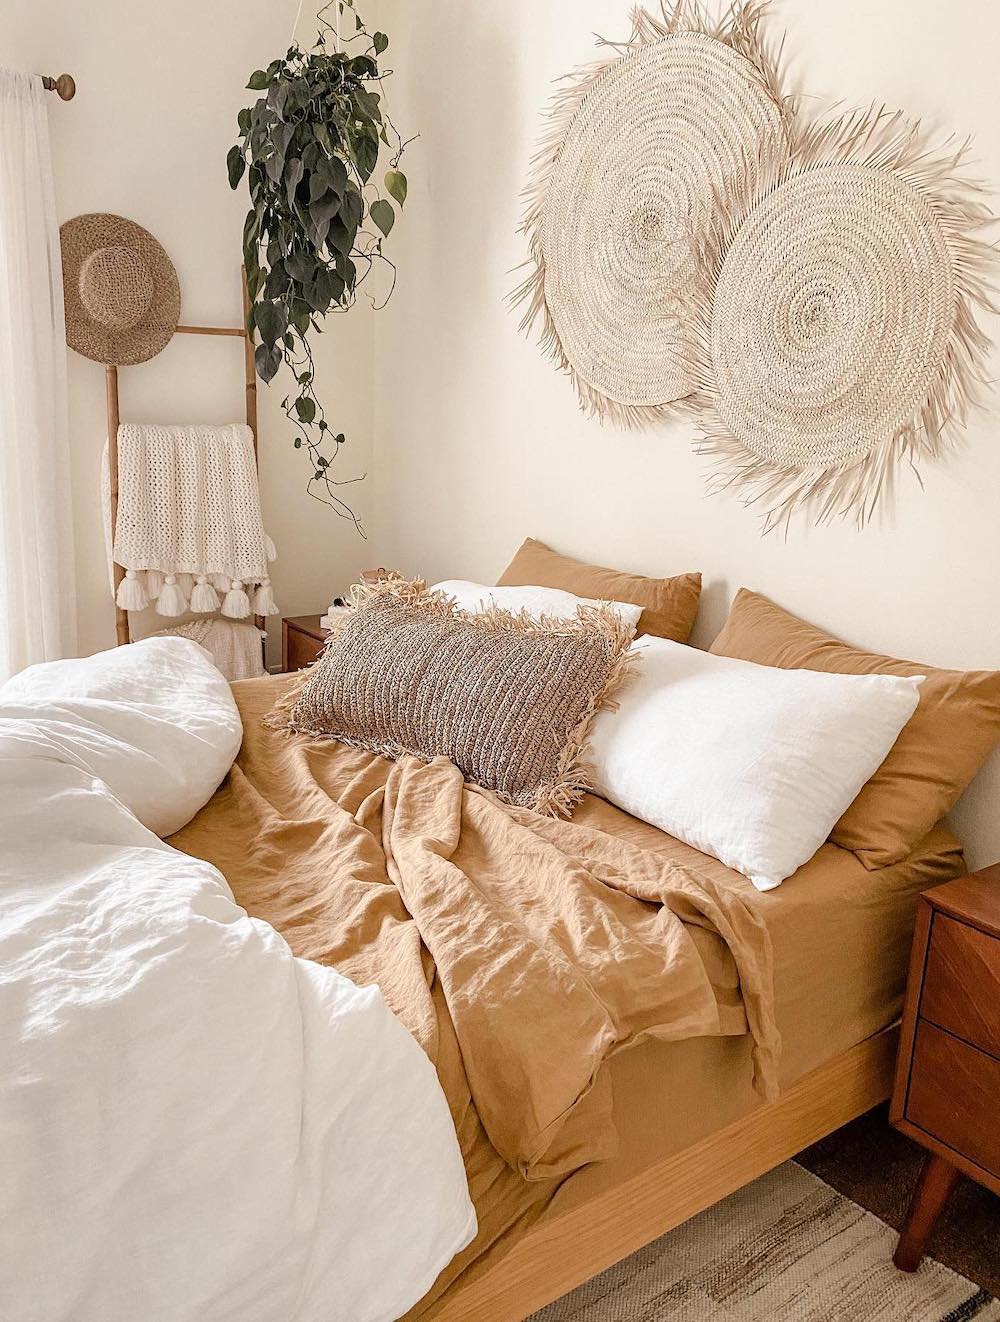 a boho bedroom with soft orange linens, wall baskets, and real plants